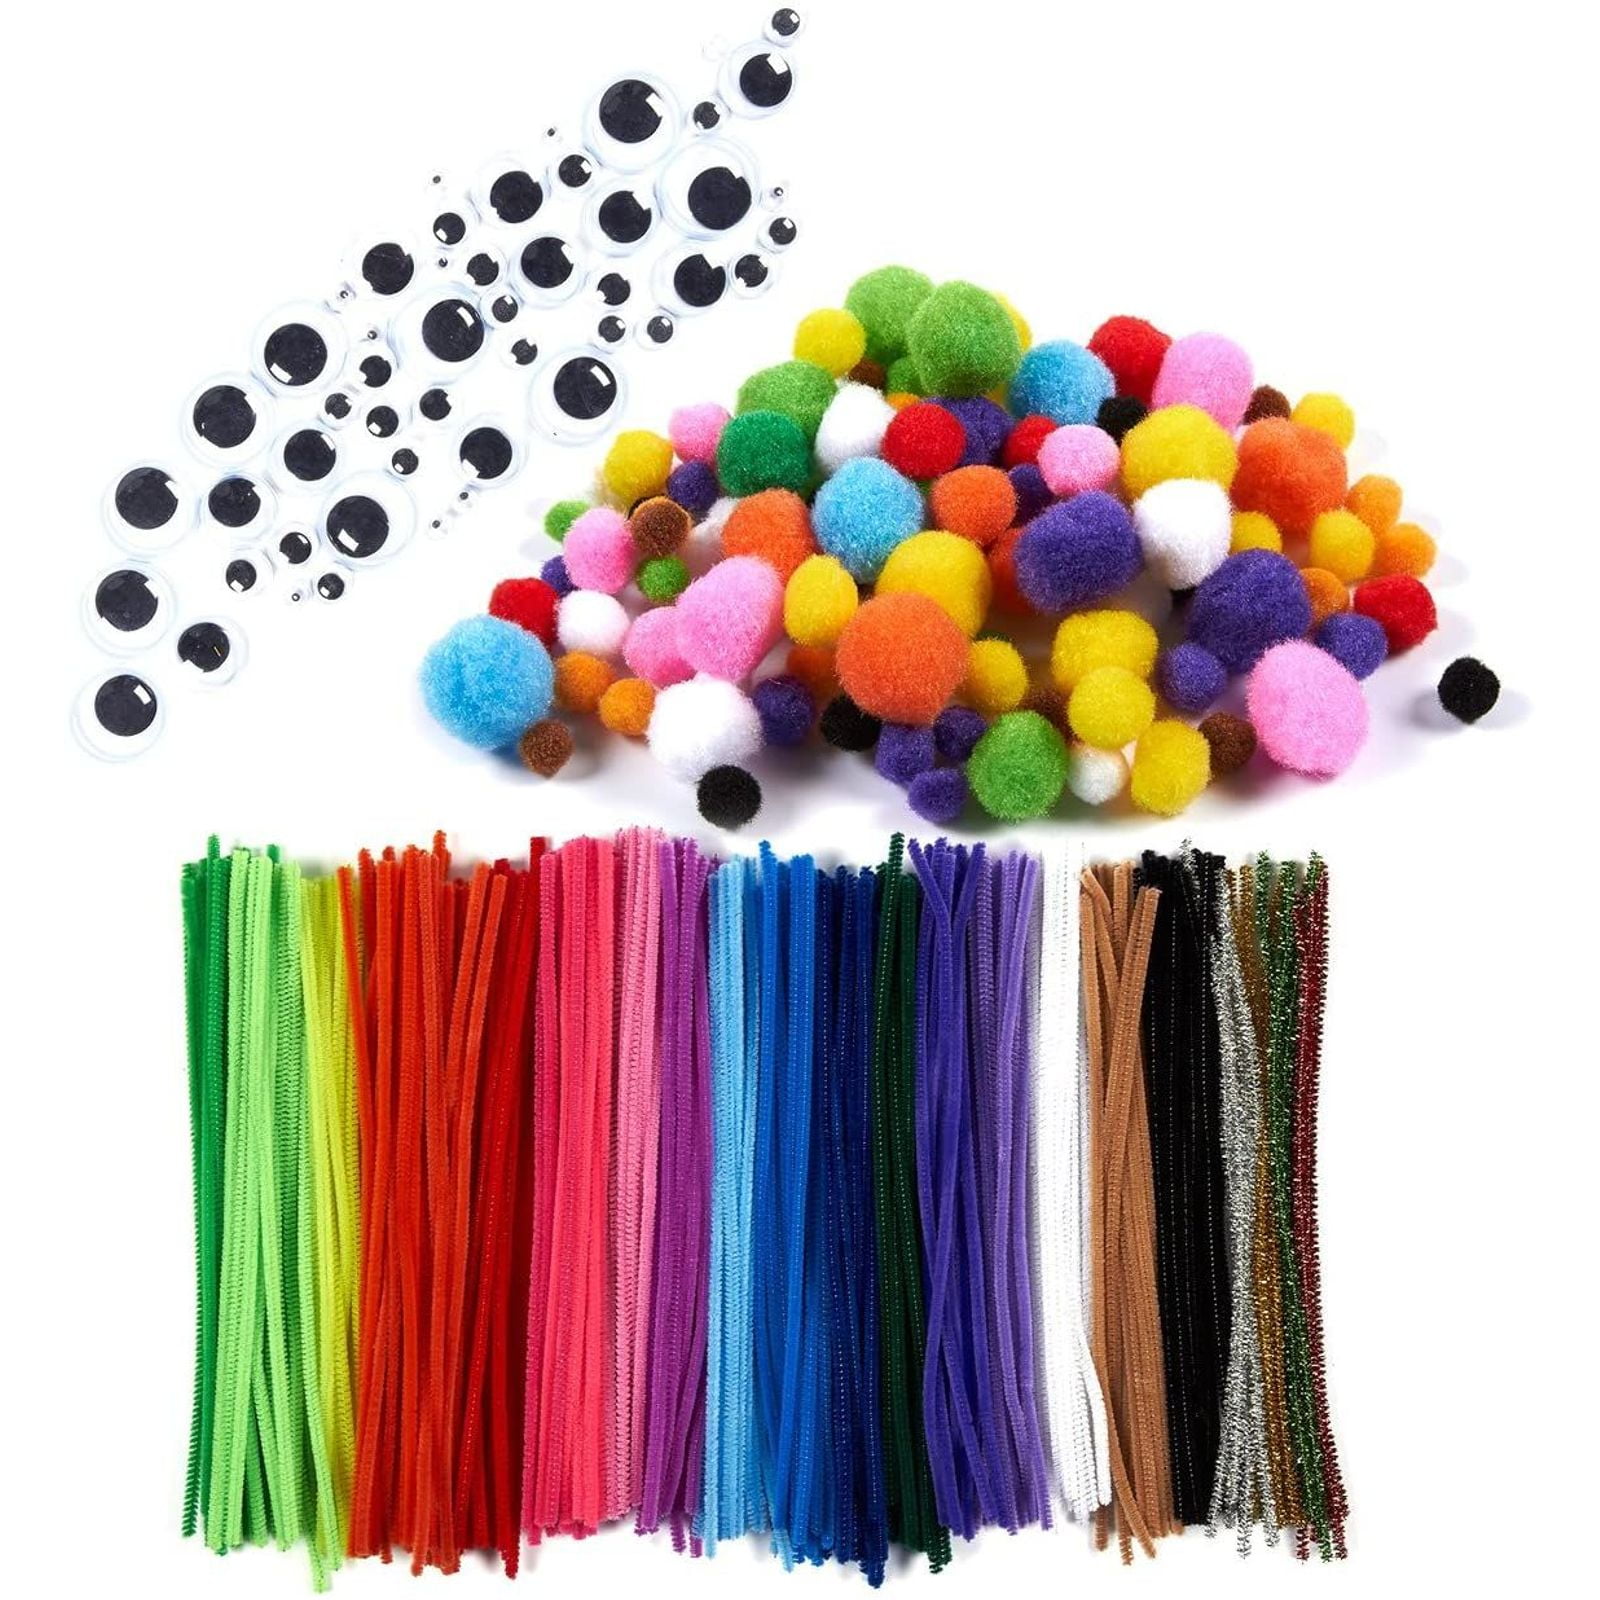 Pipe Cleaners Pom Poms All in 1 Craft Set 6mm x 12 inch Chenille Stems Assorted Color Self Adhesive Wiggle Googly Eyes Rainbow Wooden Popsicles DIY Art for Boys Girls Crafts Assorted Sizes